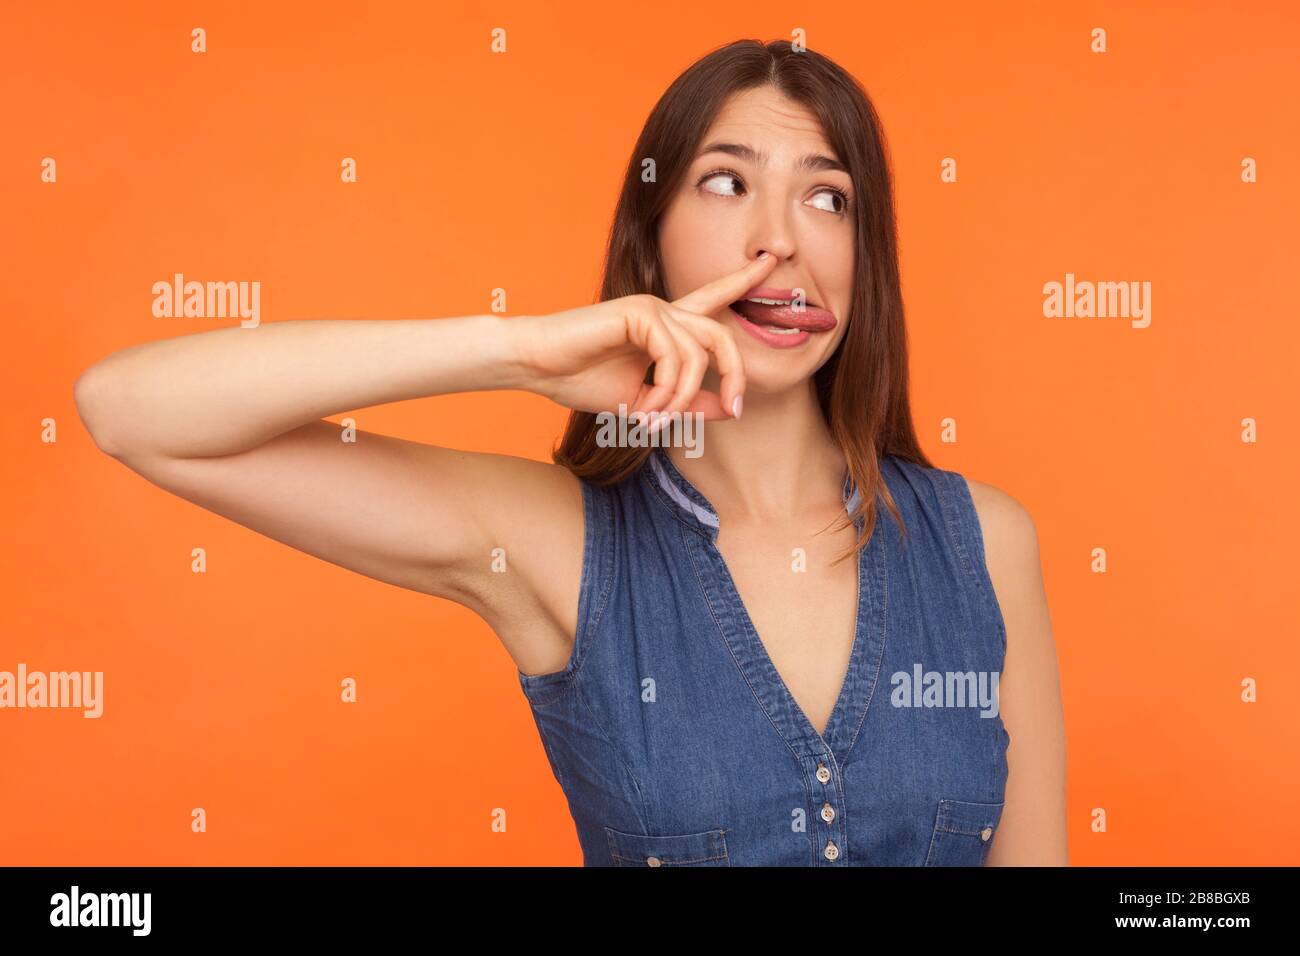 Funny Comical Brunette Woman In Denim Dress Picking Nose And Showing Tongue With Humorous Stupid 2057